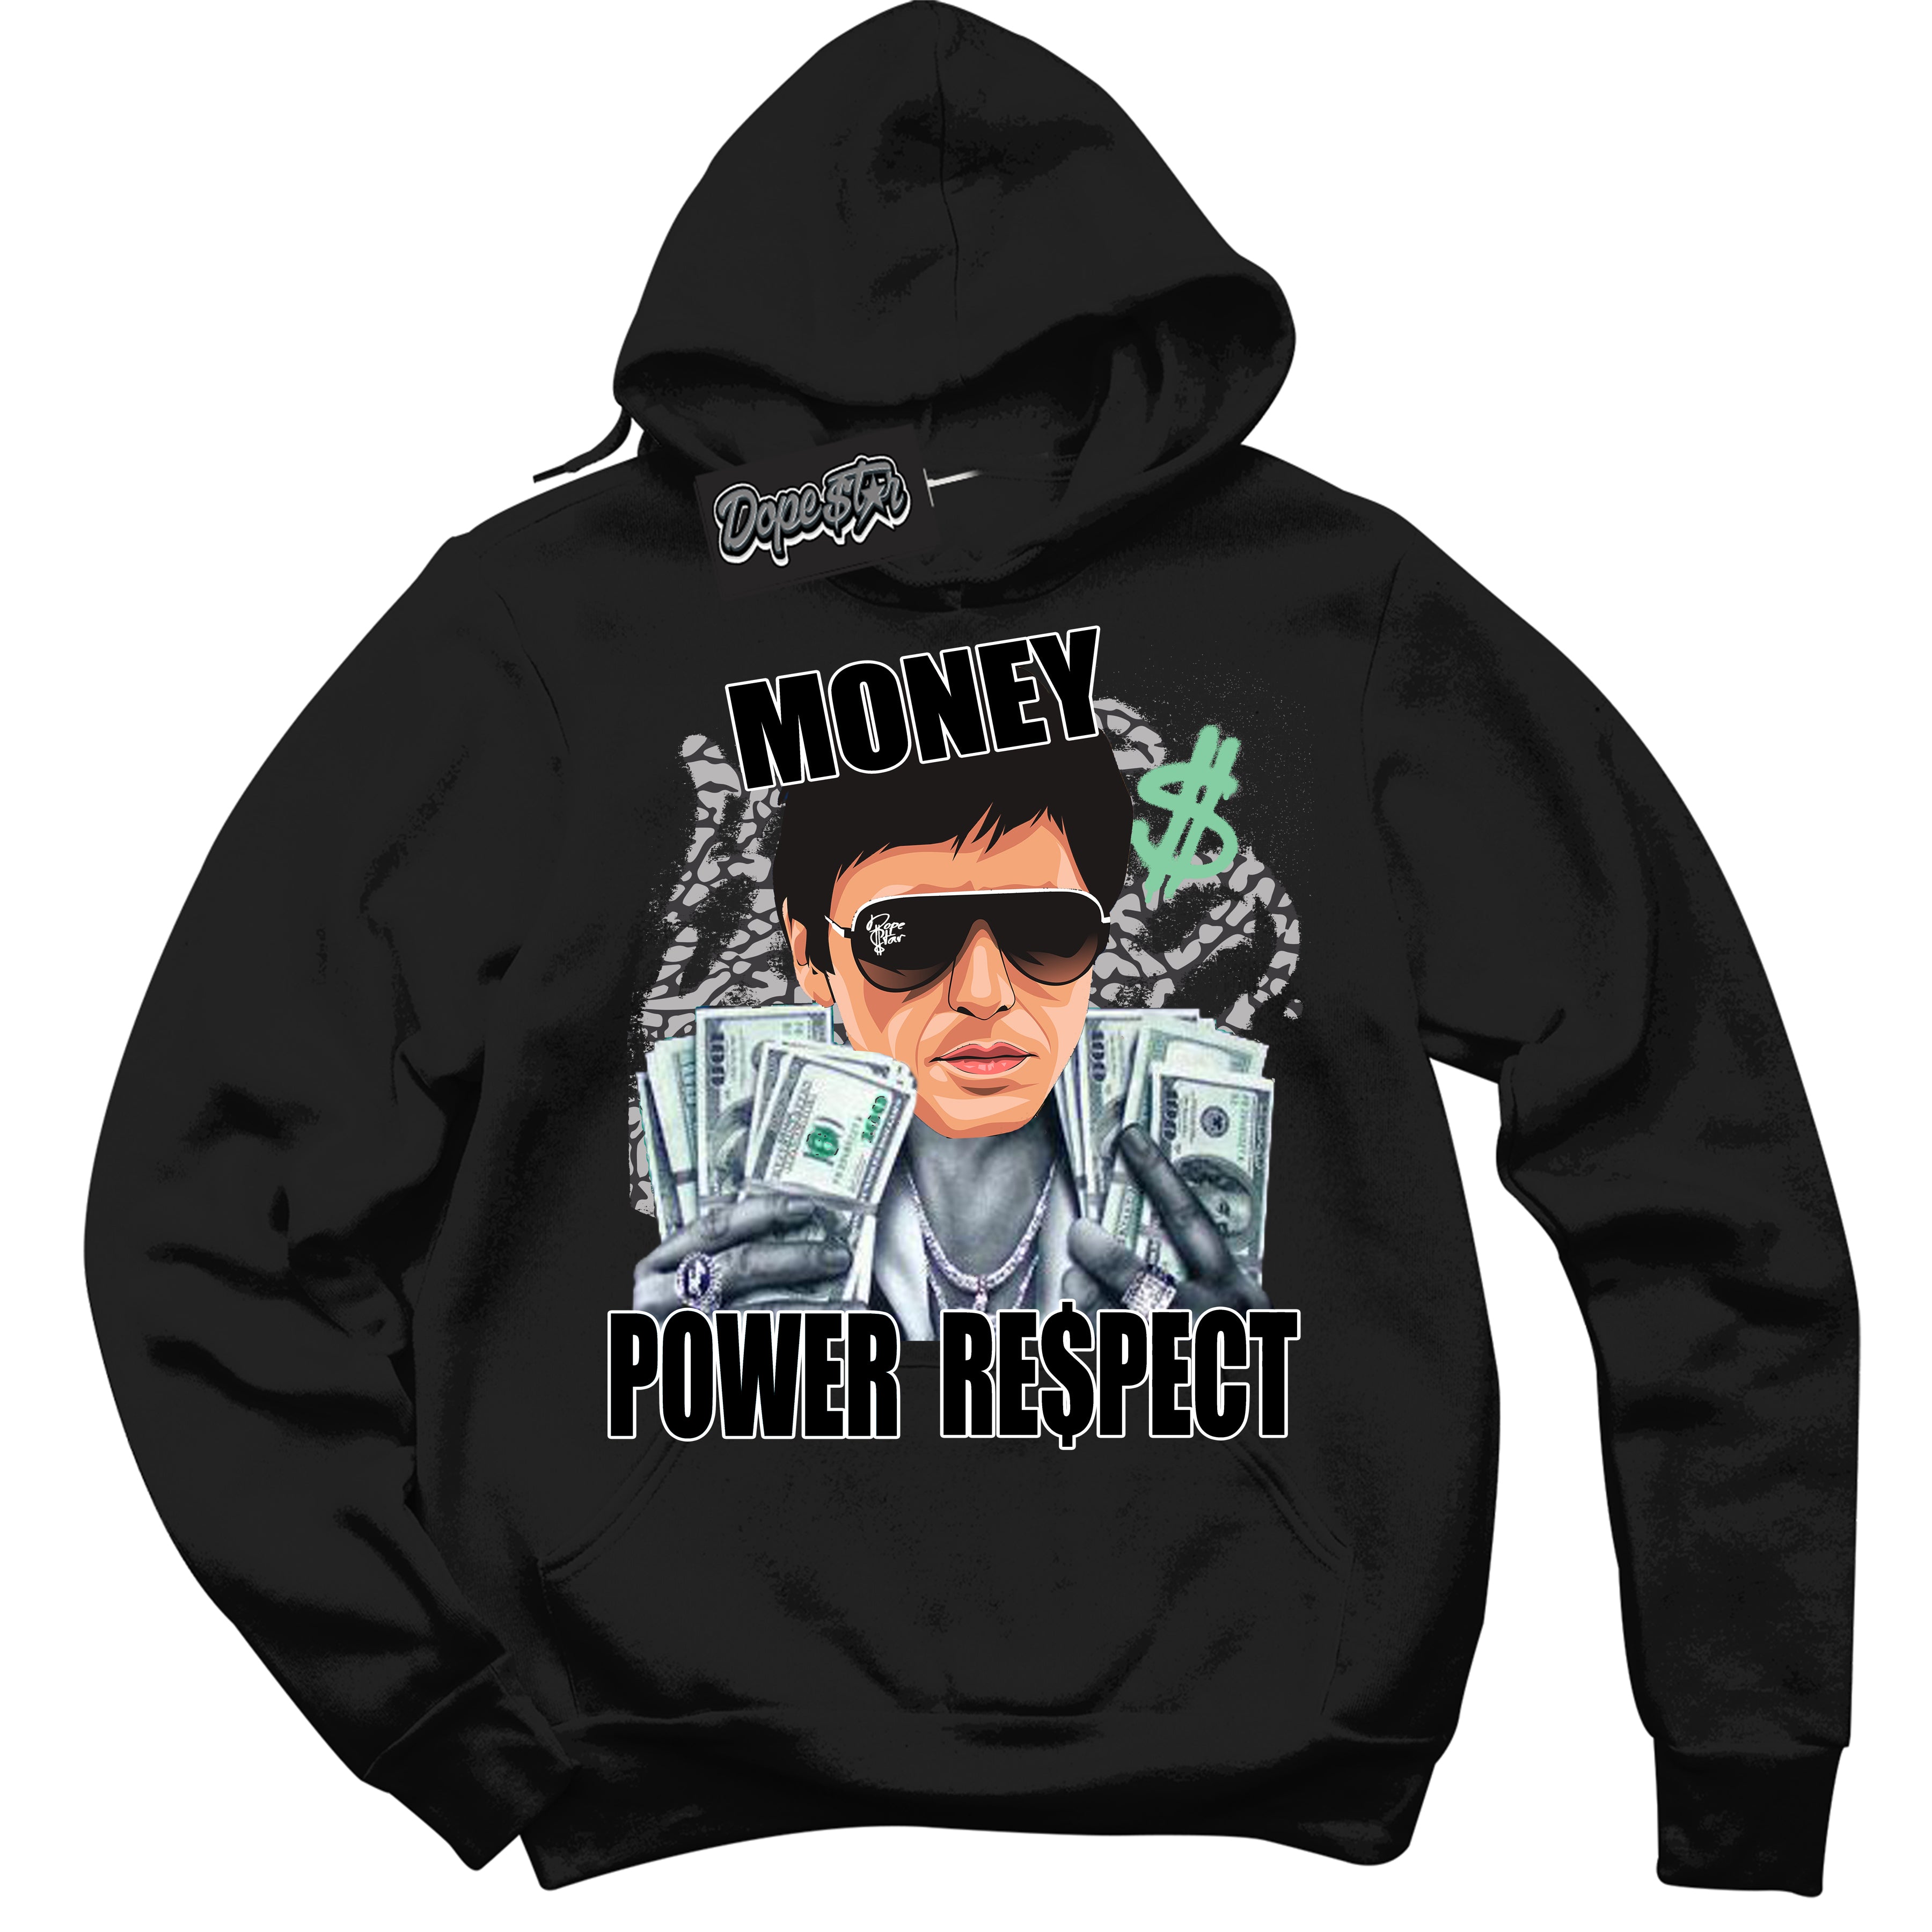 Cool Black Graphic DopeStar Hoodie with “ Tony Montana “ print, that perfectly matches Green Glow 3S sneakers